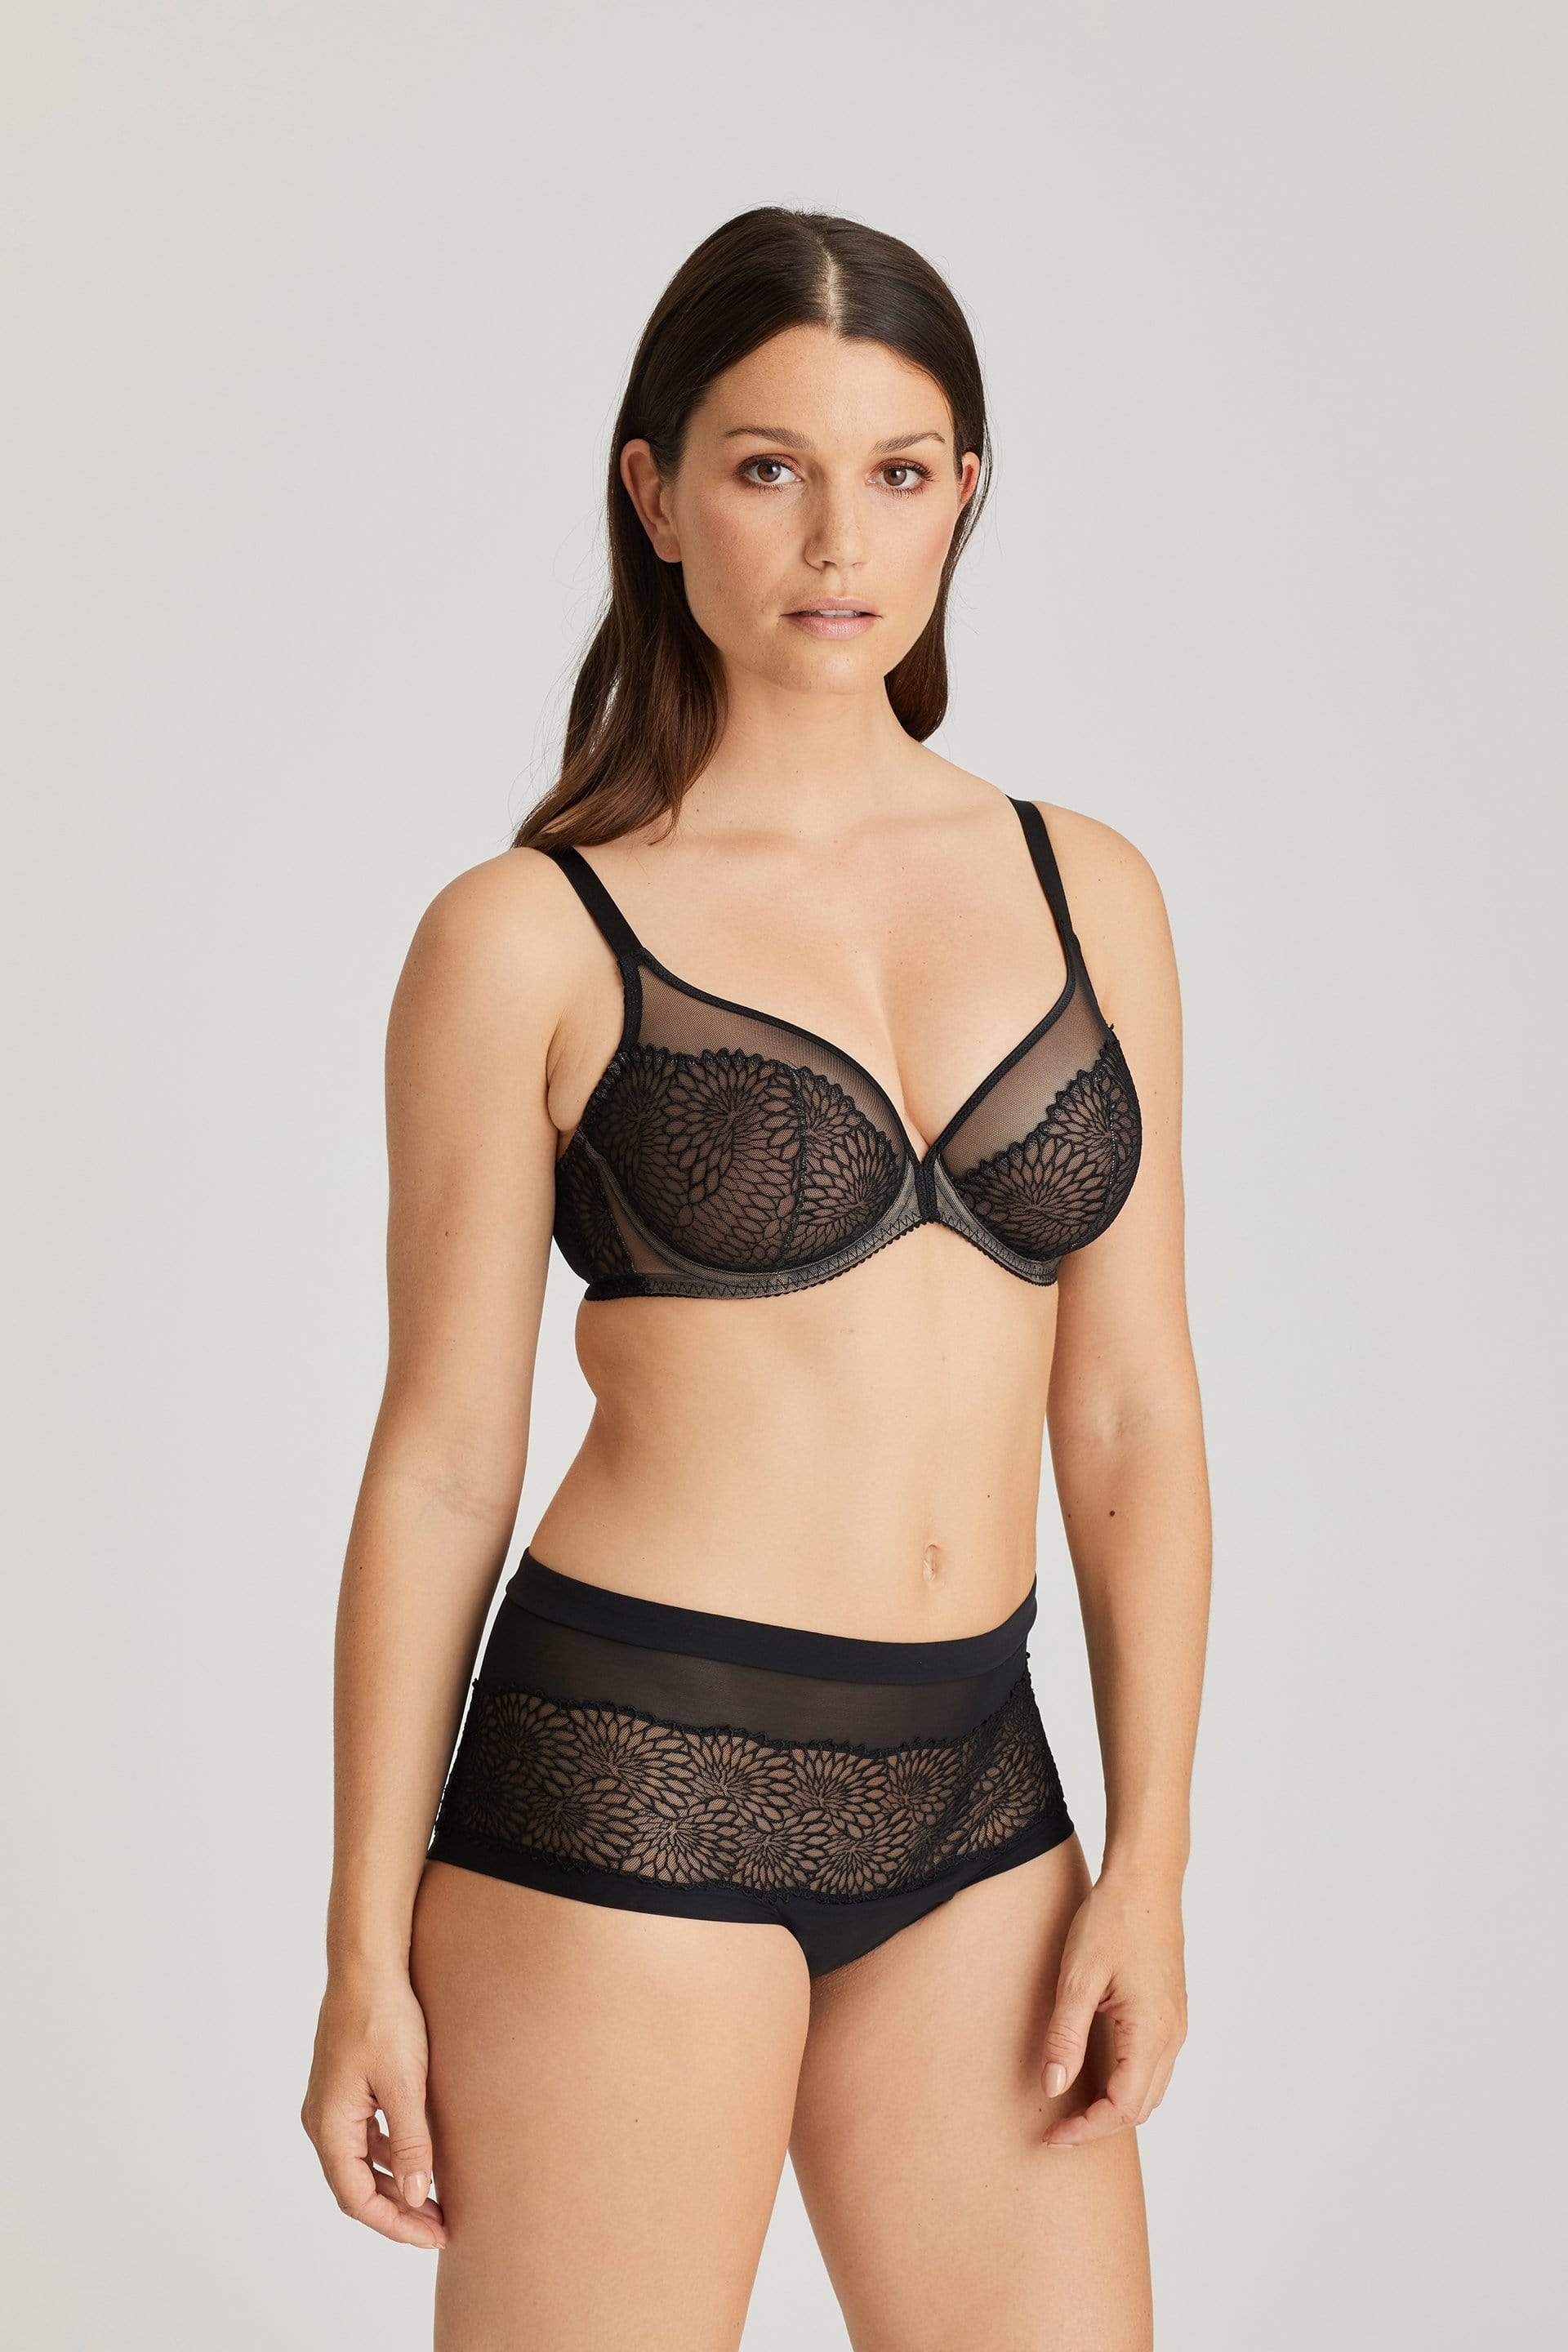 Prima Donna Sophora - Briefs  Available at Illusions Lingerie